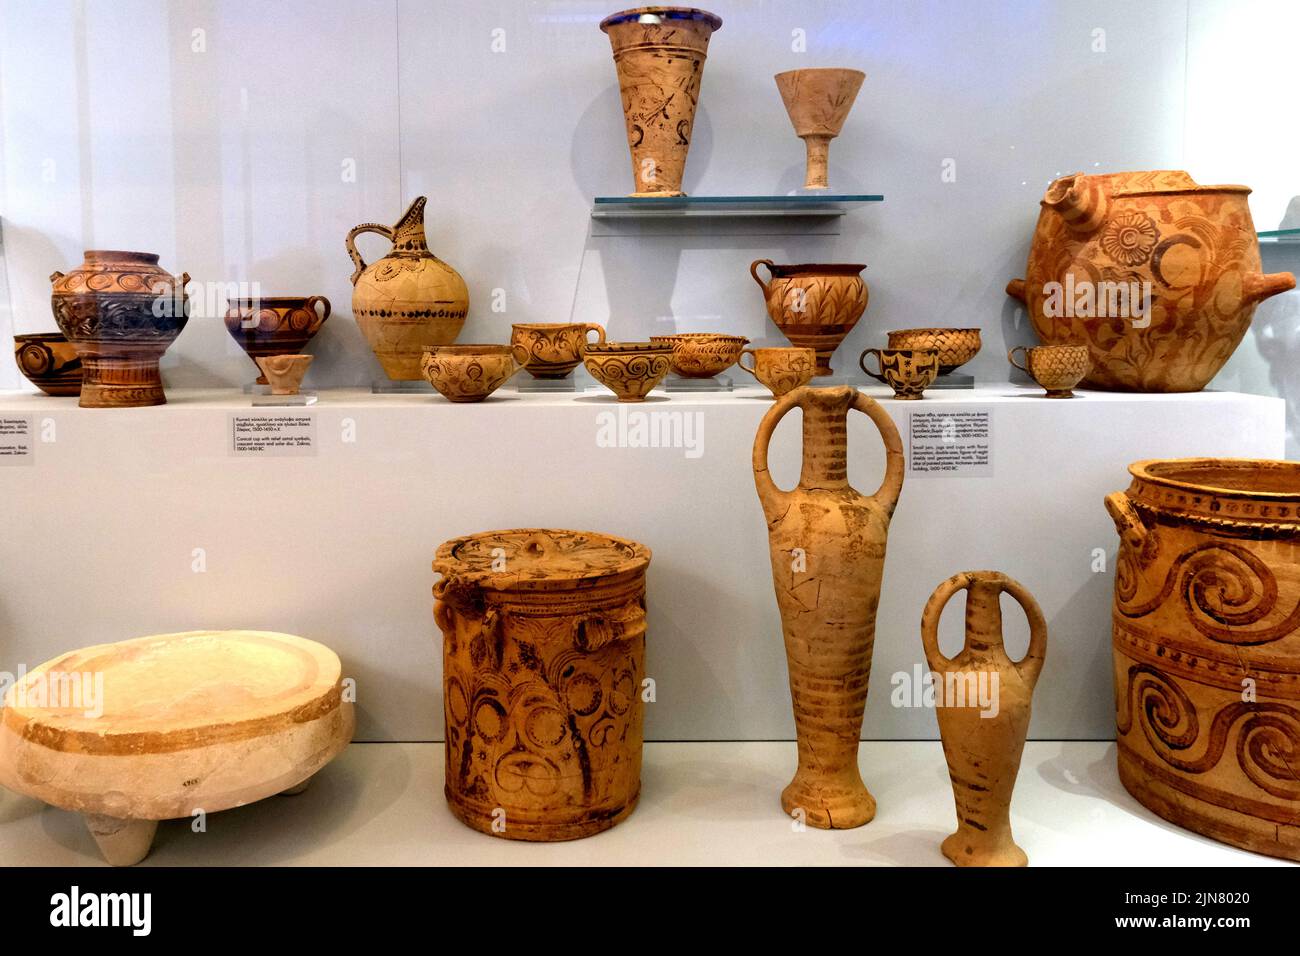 Various pottery jars and vases in the Heraklion Archaeological Museum in Crete Greece Stock Photo